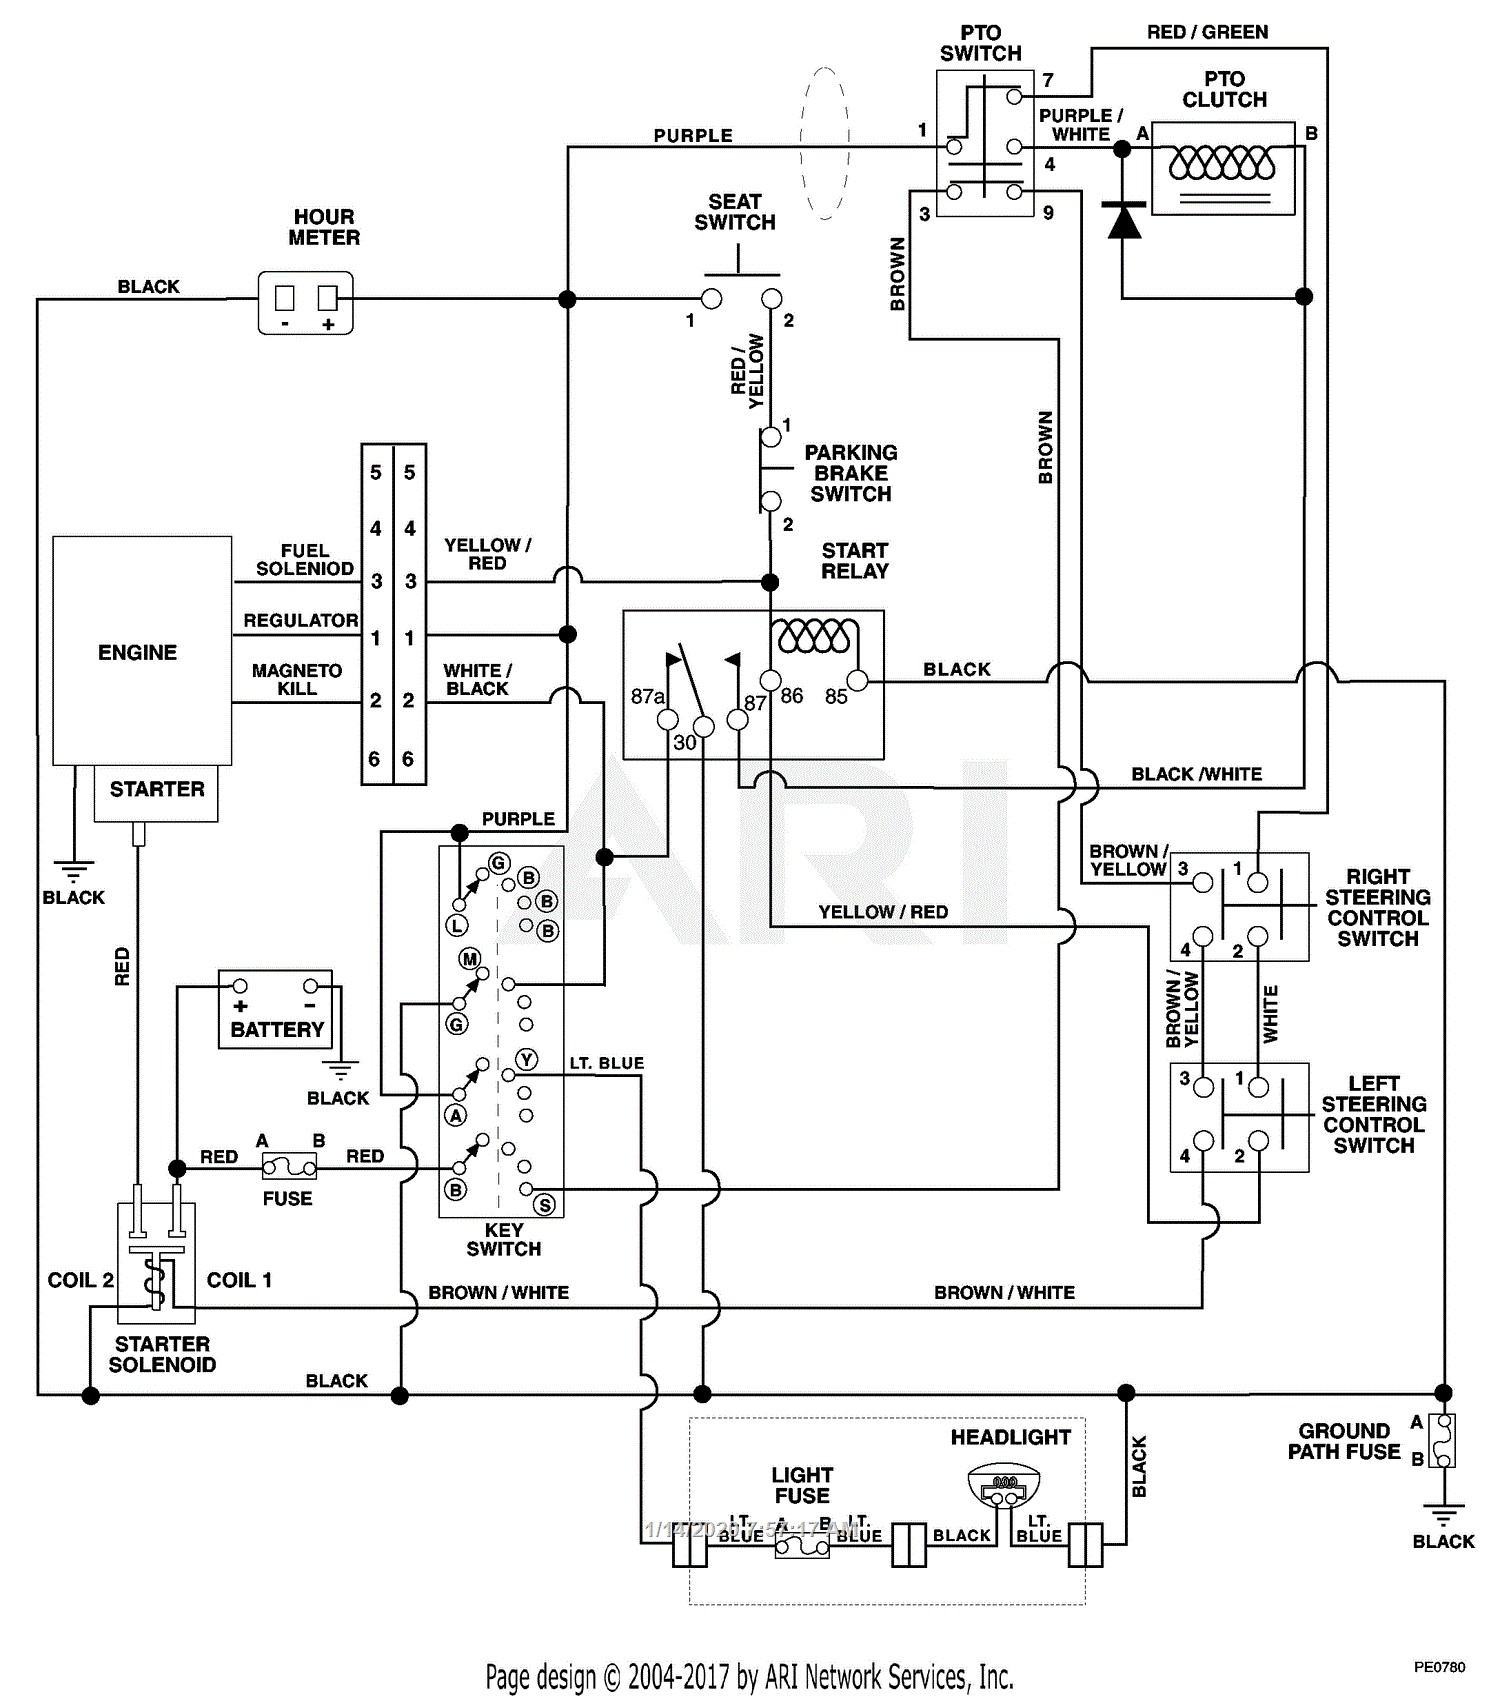 Ford 3000 Parts Diagram Wiring Diagram ford 4000 Tractor 1966 Free Download Wiring Of Ford 3000 Parts Diagram